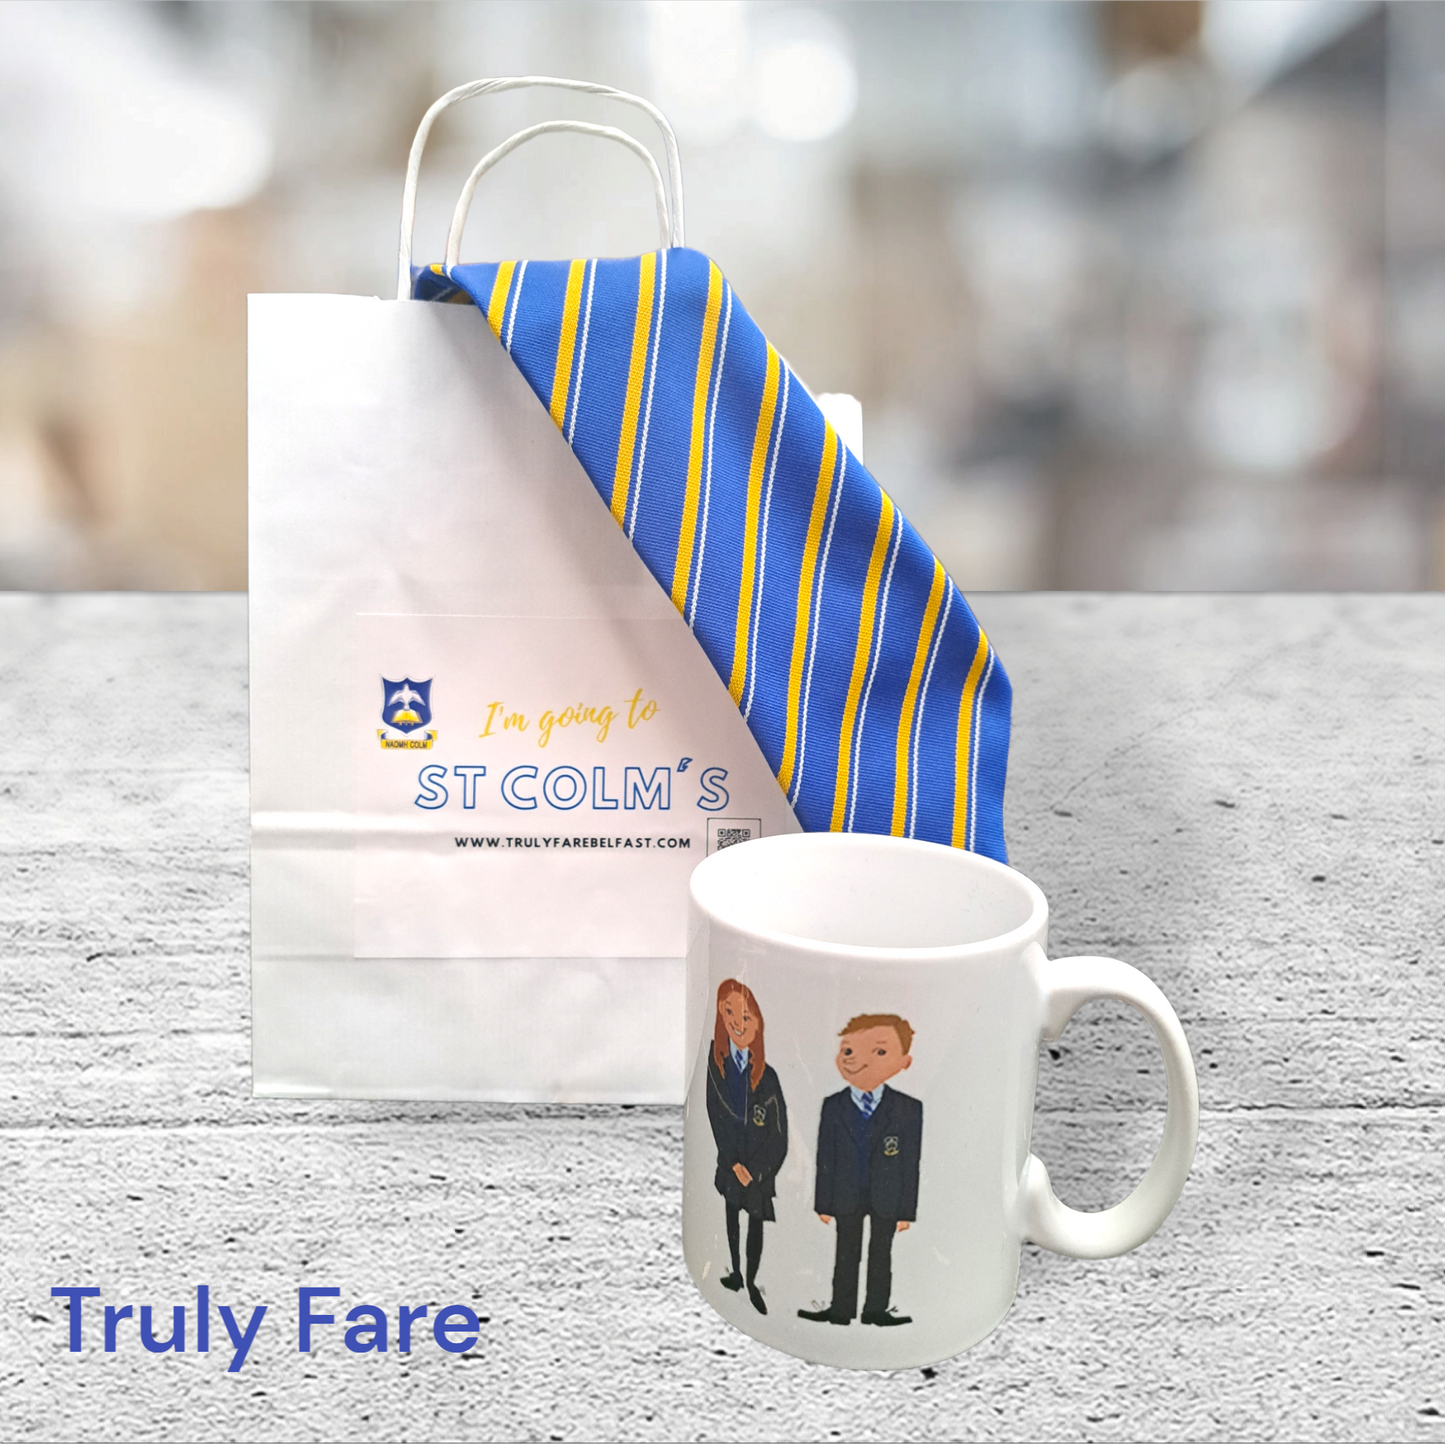 St Colm's tie, cup and gift bag set